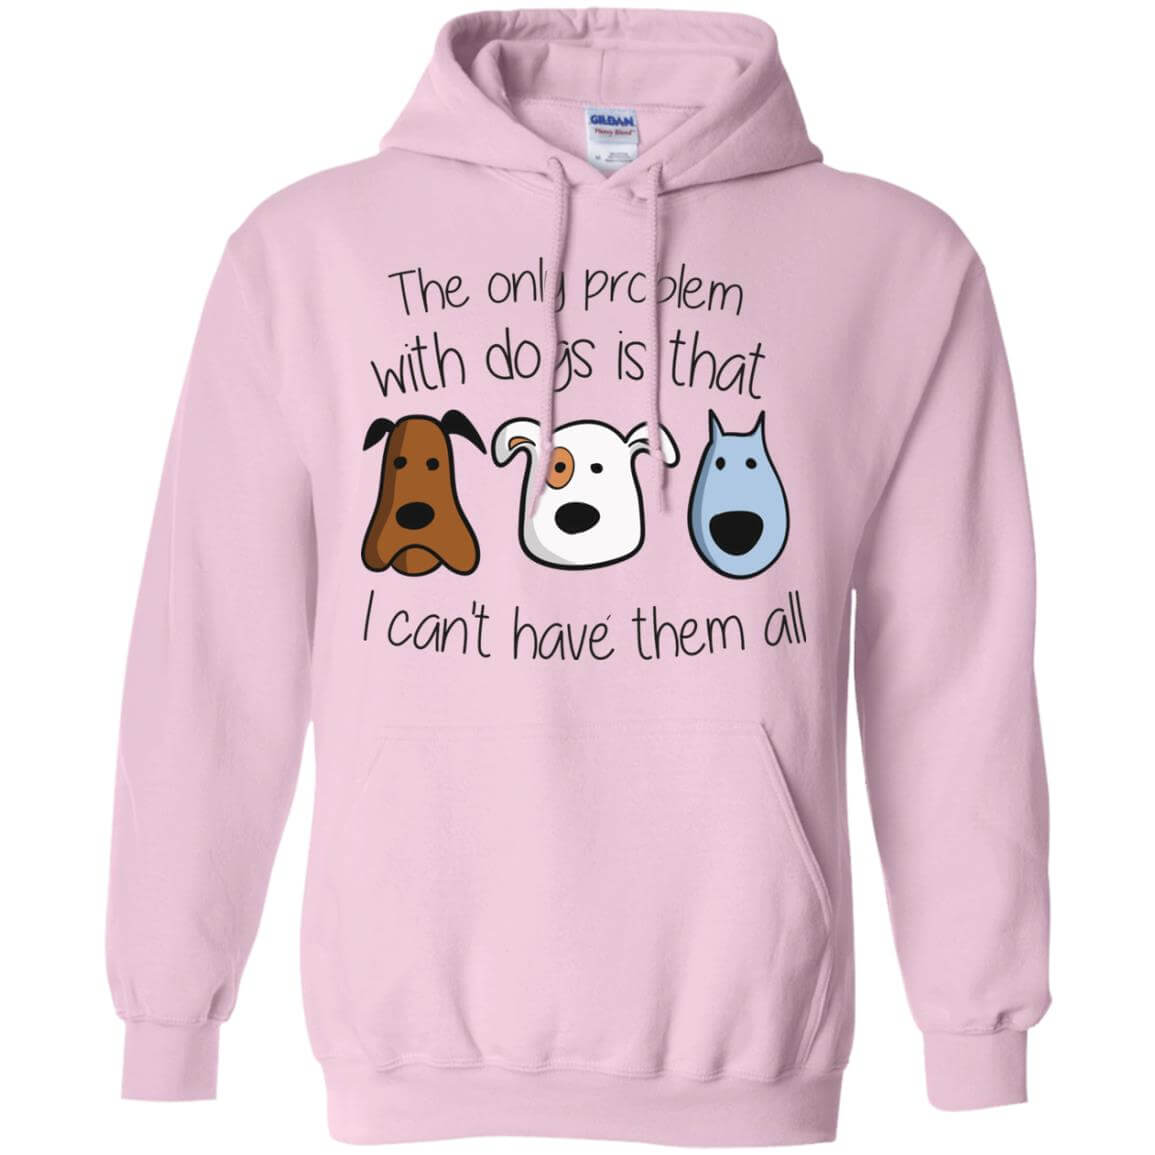 I Can't Have Them All Pullover Hoodie